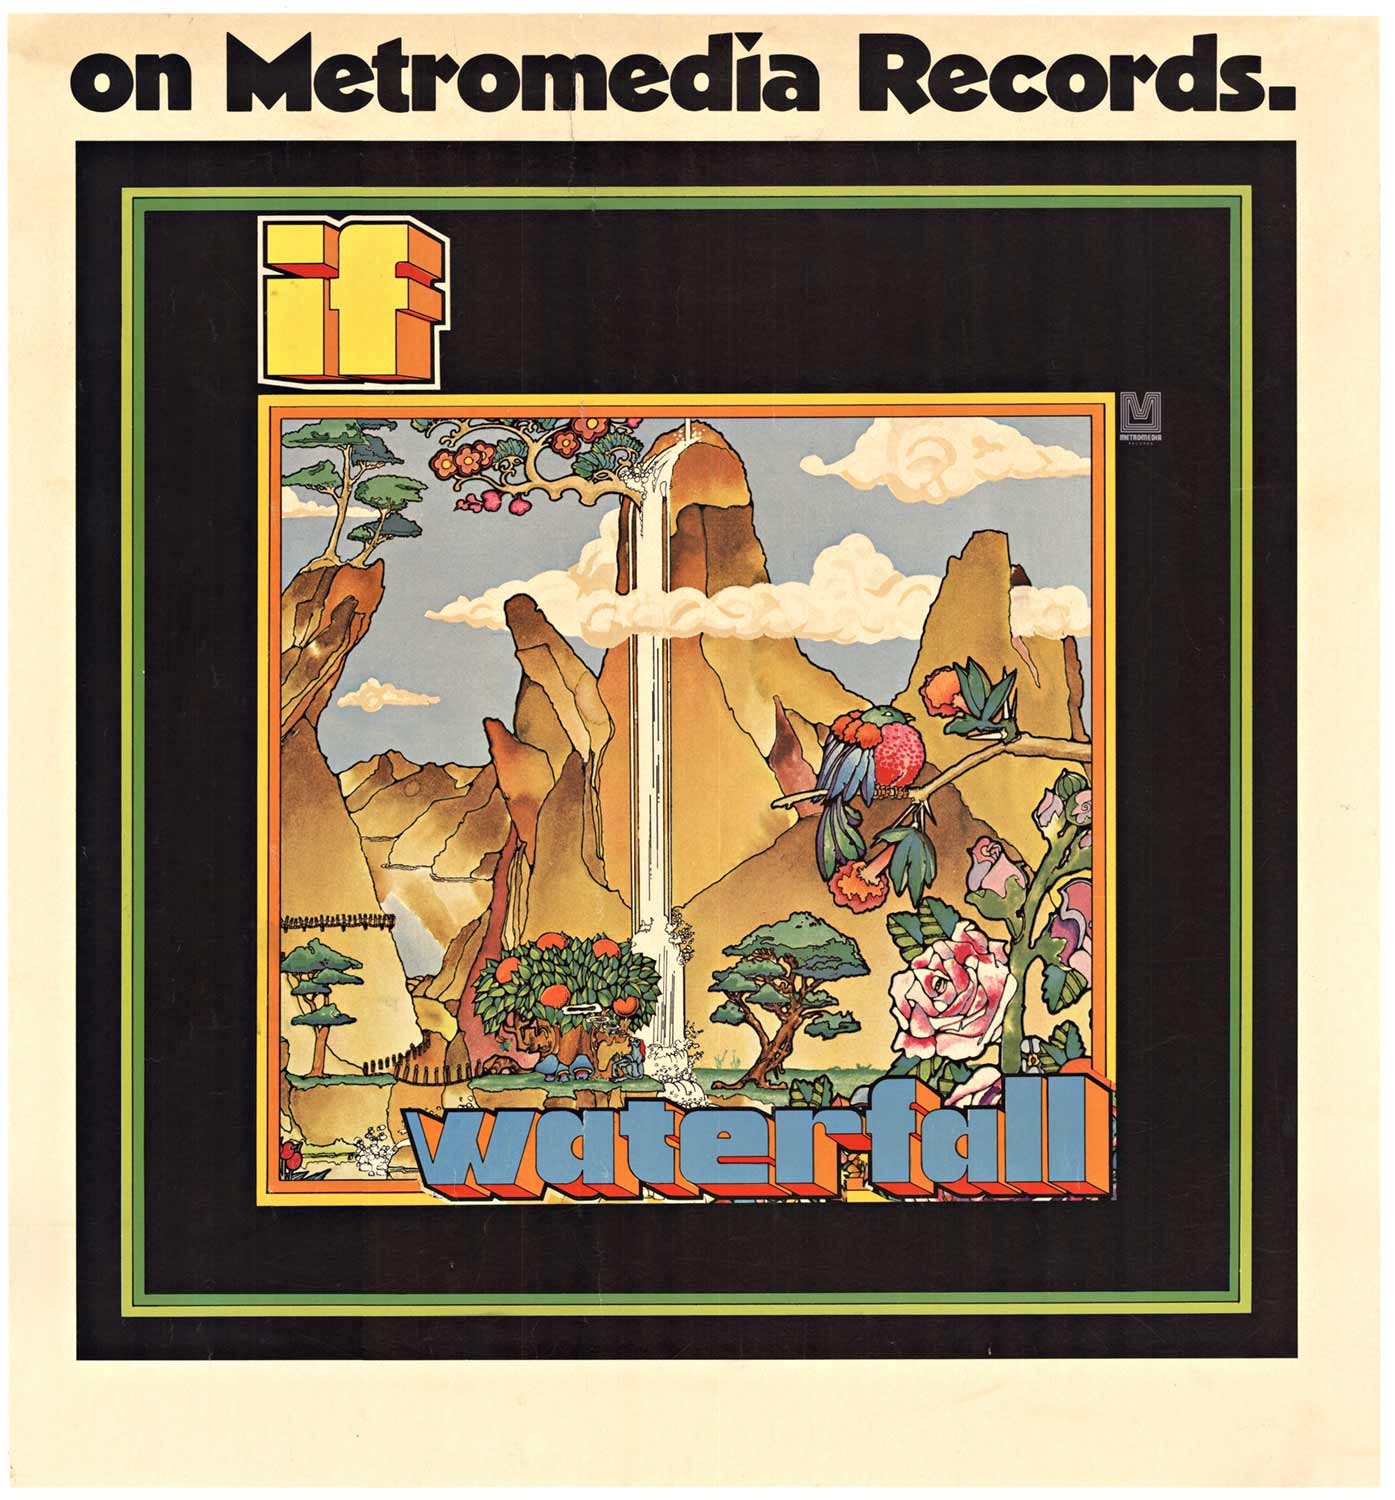 On Metromedia Records, Waterfall by the band IF. Very rare music poster. Linen backed and in very good condition. <br>If was a seminal band formed in 1969 as Britain’s answer to the pioneering U.S. bands Blood, Sweat and Tears and Chicago. Unlike thes